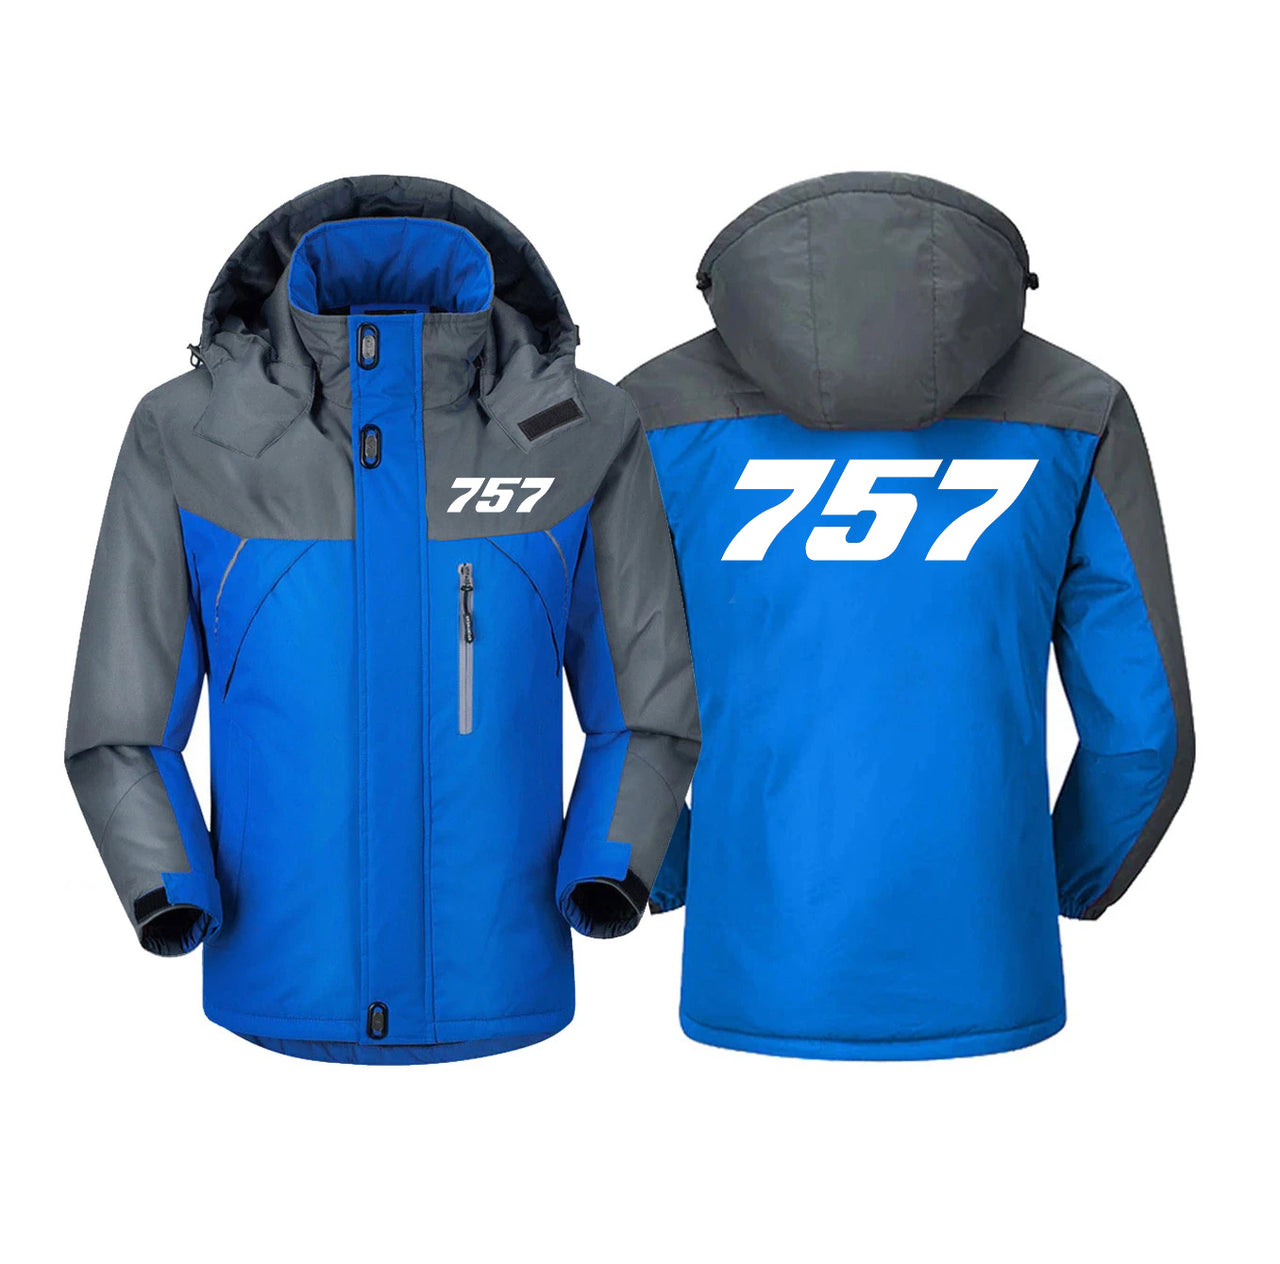 757 Flat Text Designed Thick Winter Jackets